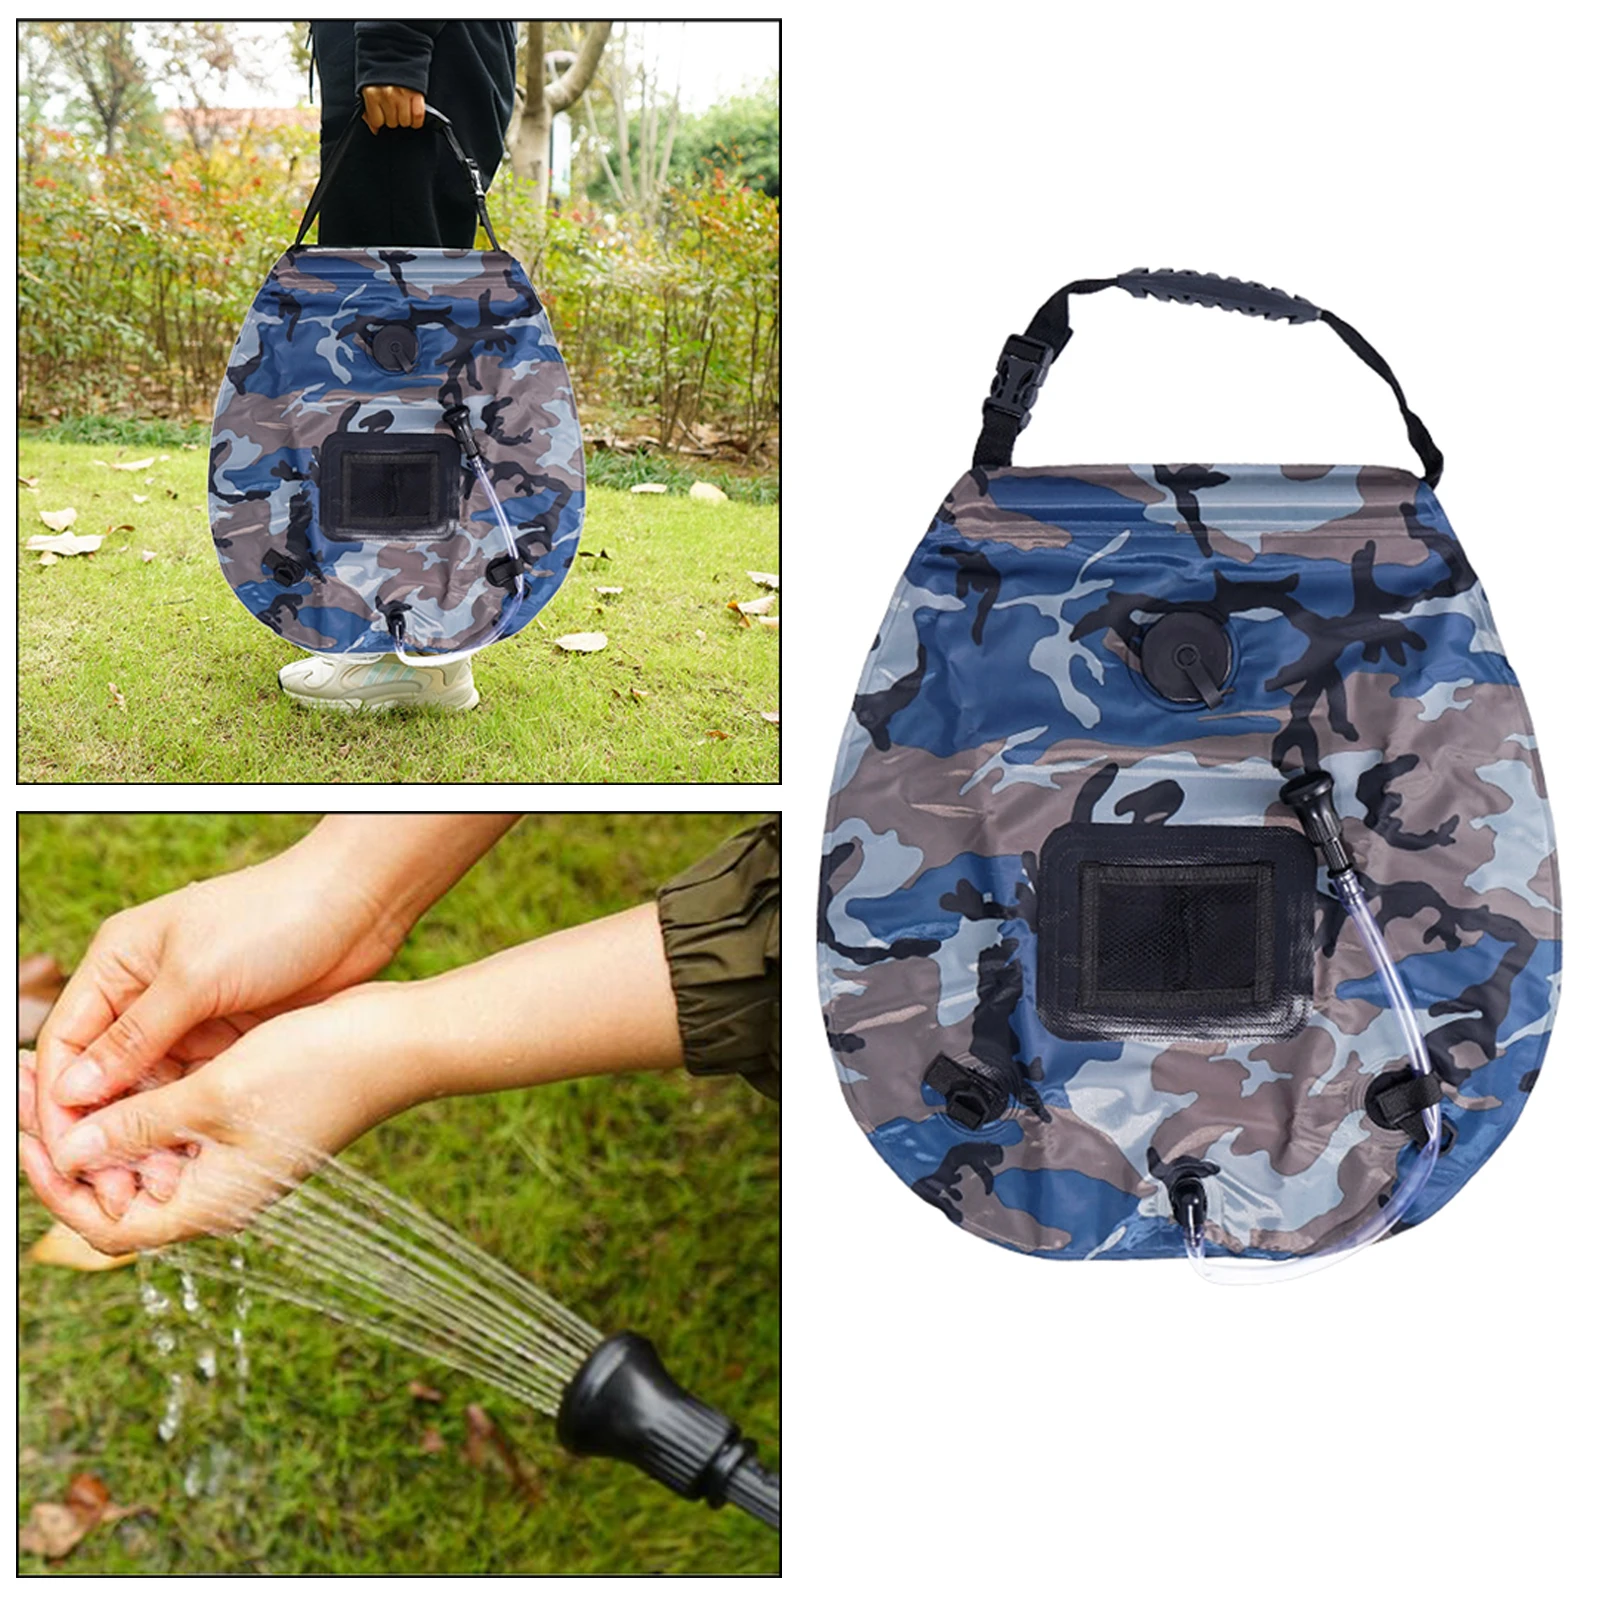 20L Solar Camping Shower Bag for Beach Swimming Hiking Outdoor Shower